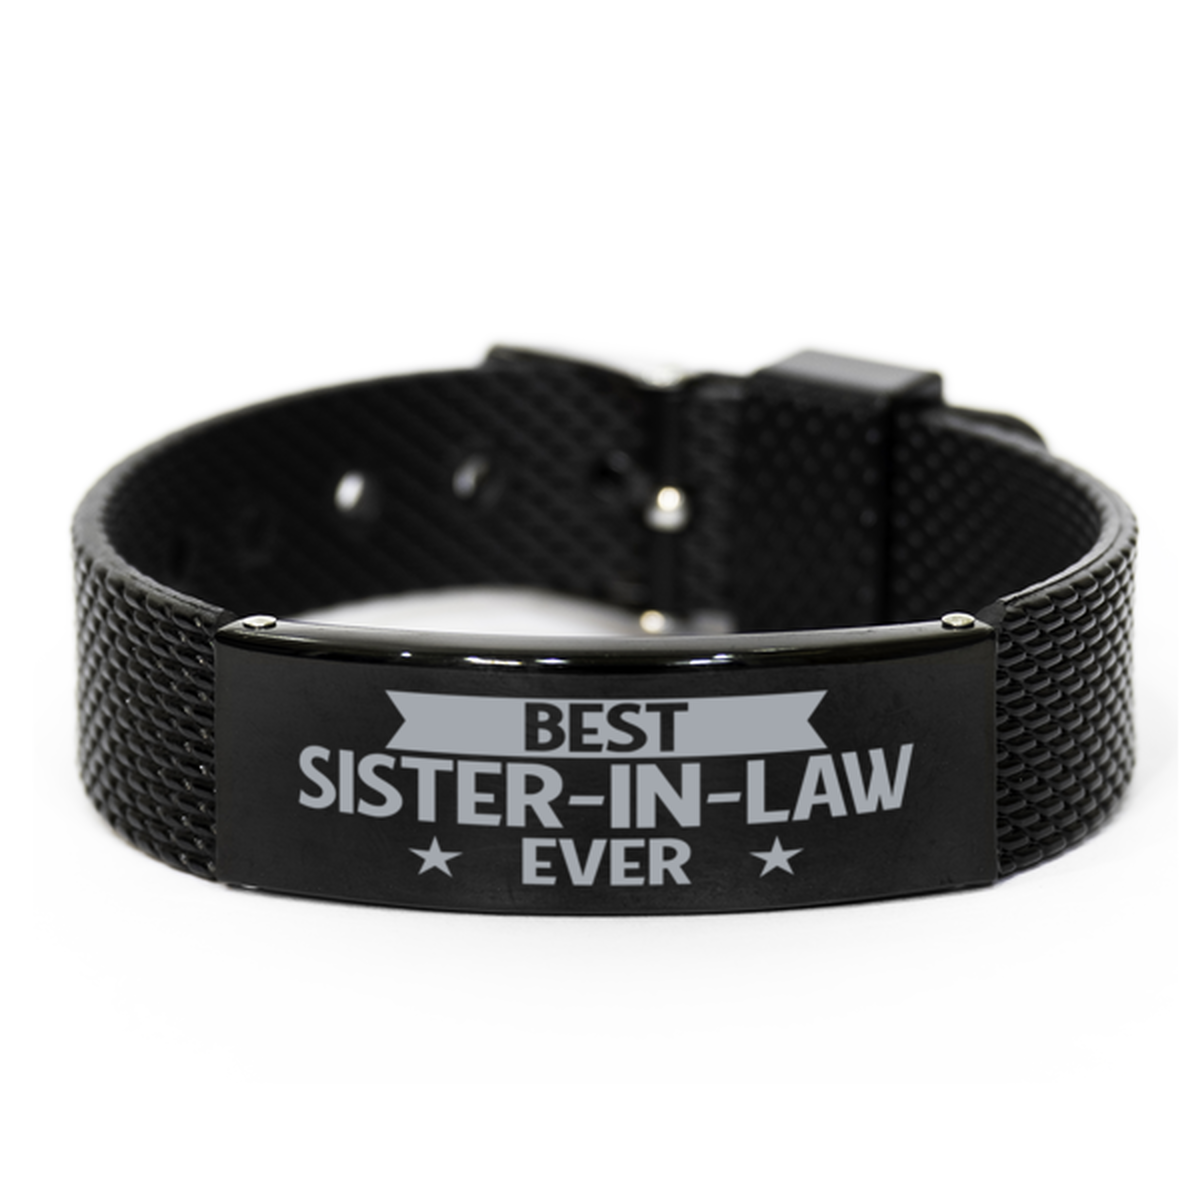 Best Sister-in-law Ever Sister-in-law Gifts, Gag Engraved Bracelet For Sister-in-law, Best Family Gifts For Women